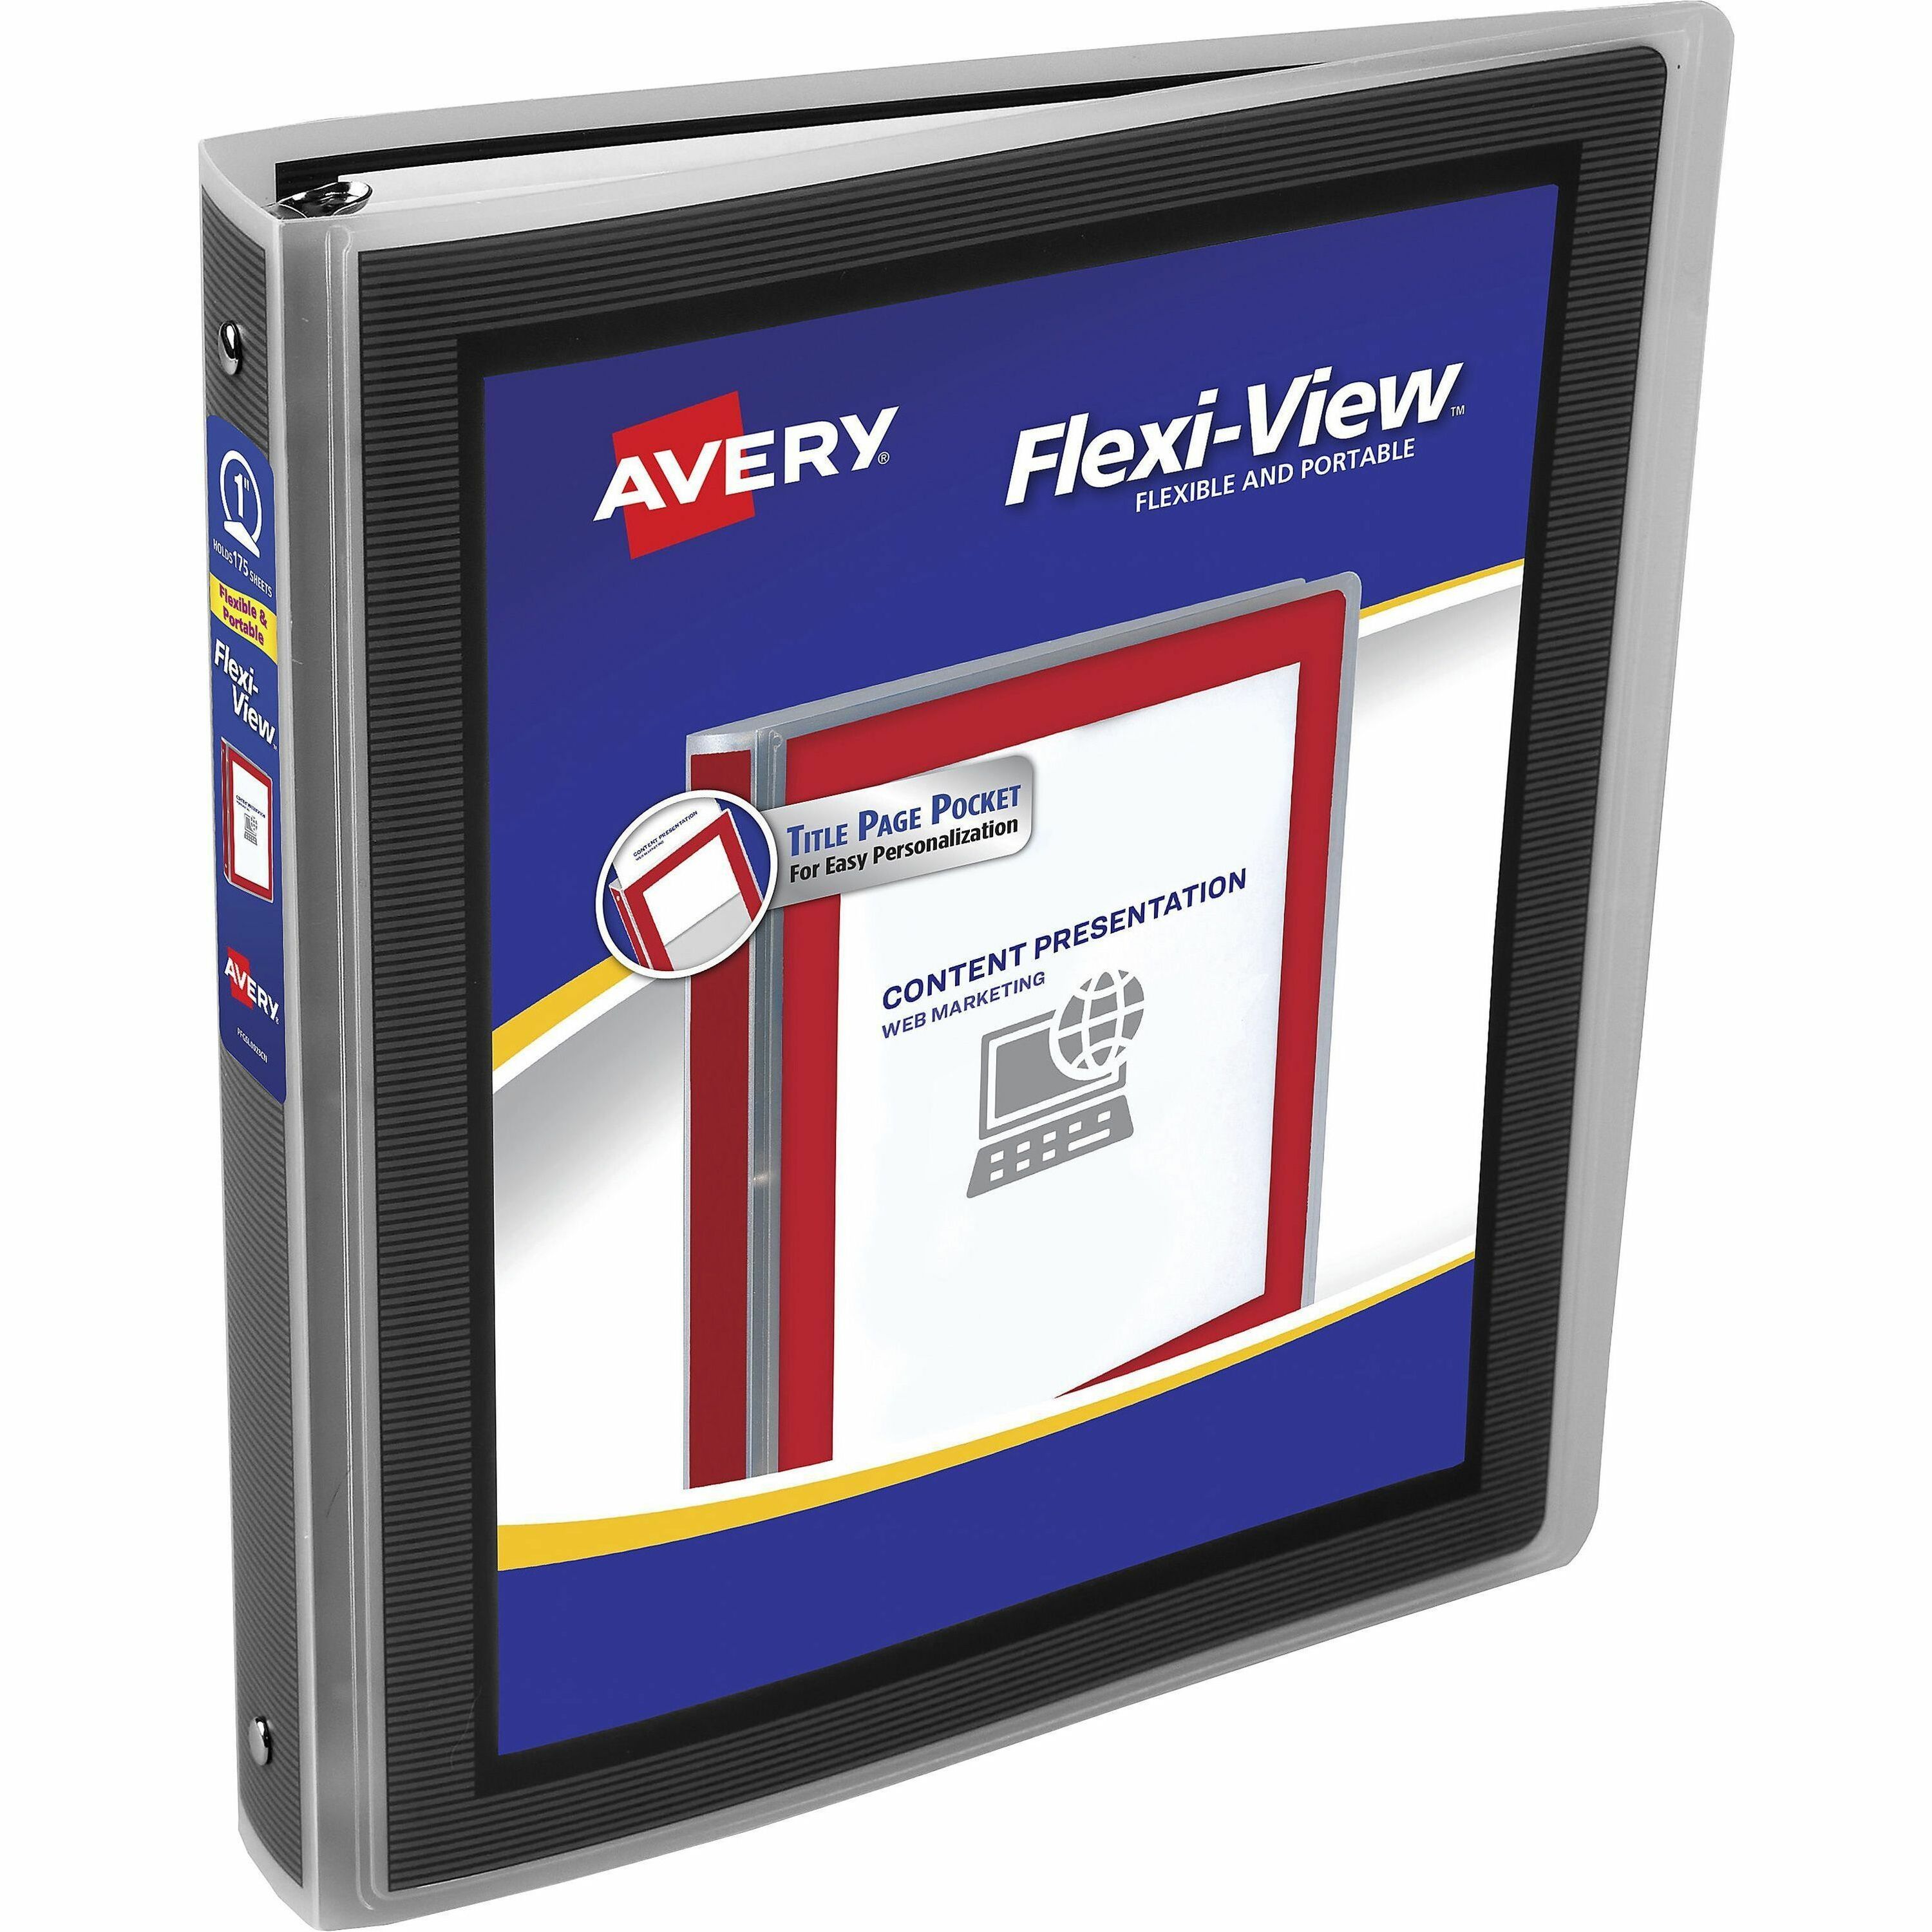 Avery Flexi-View Binder with Round Rings, 1 inch Capacity, Black